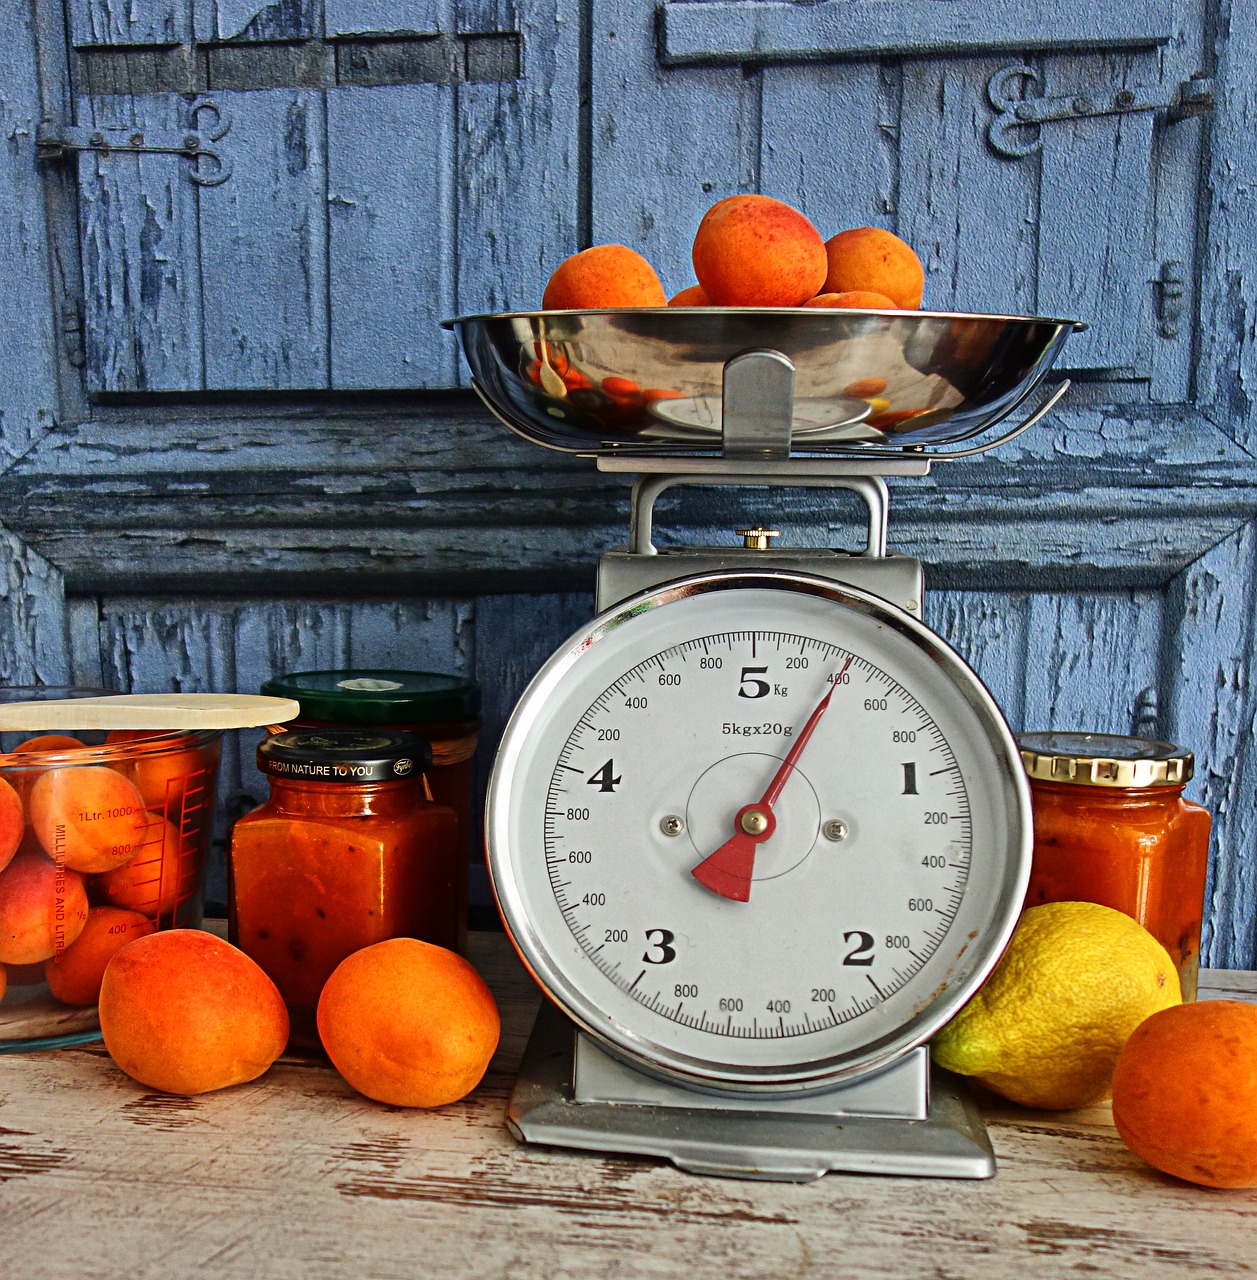 Learn a New Skill – Canning & Preserving Your Own Fruit & Vegetables